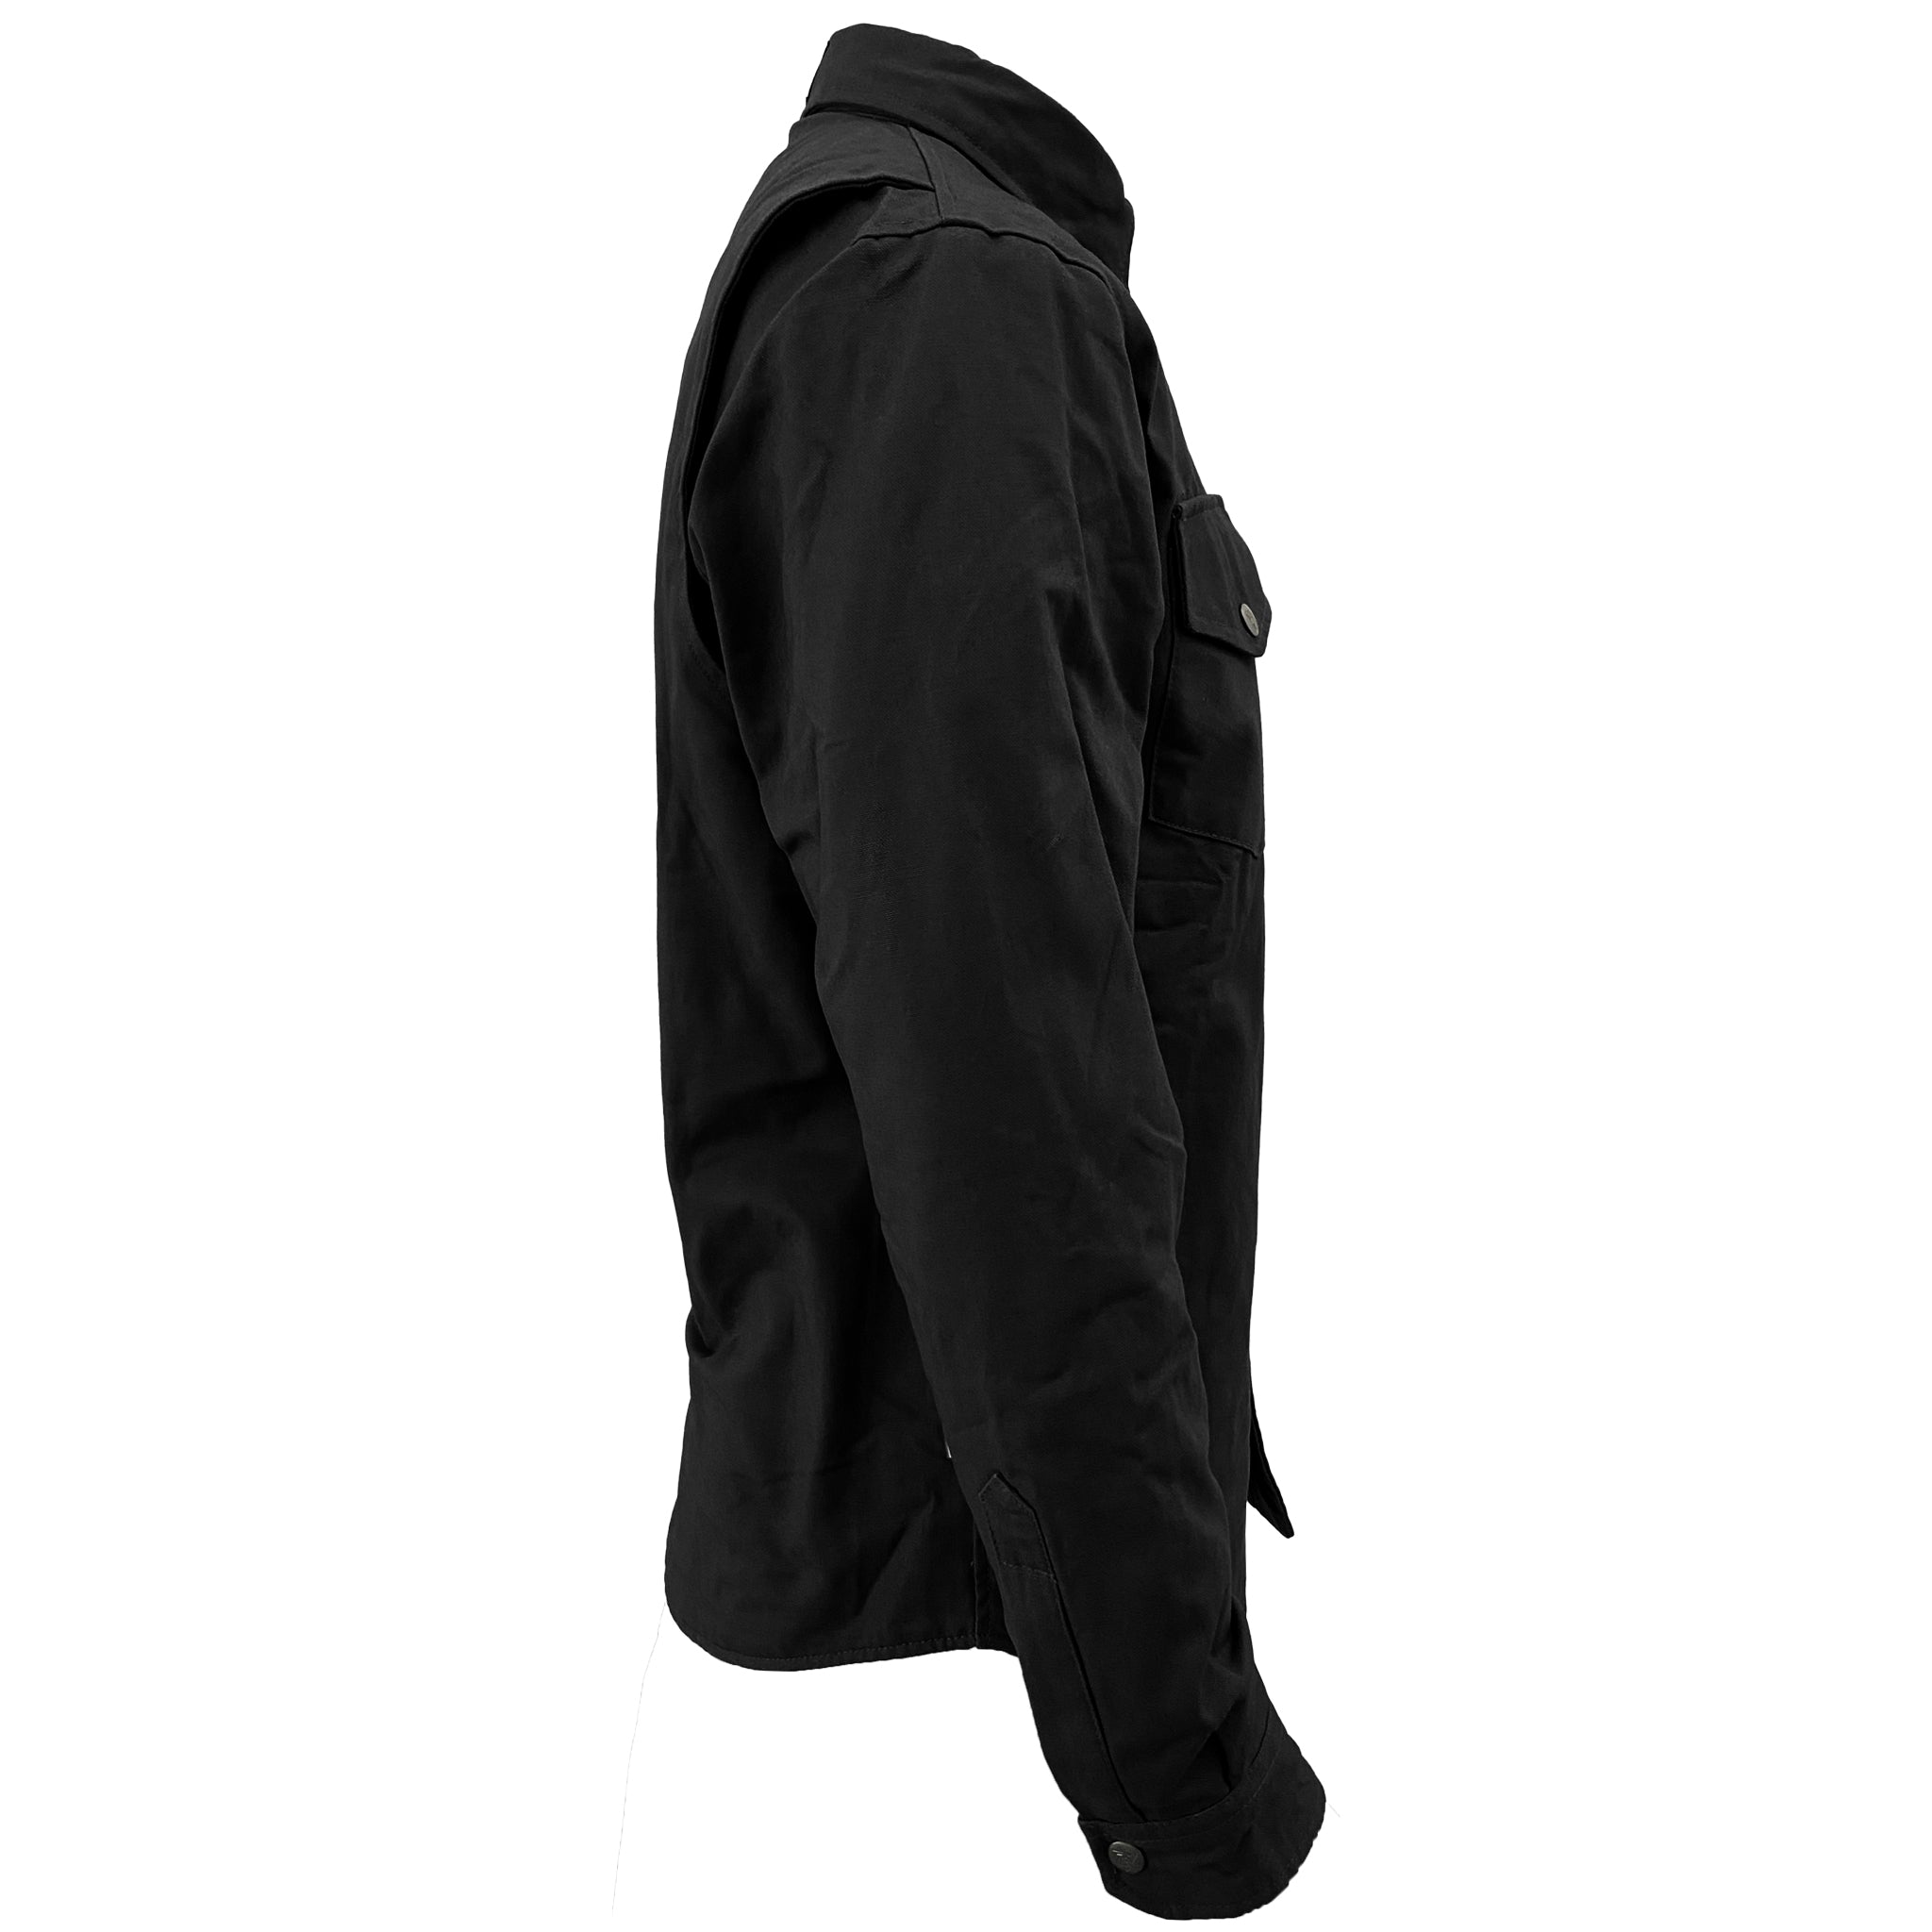 SALE Protective Canvas Jacket for Men - Black Solid with Pads